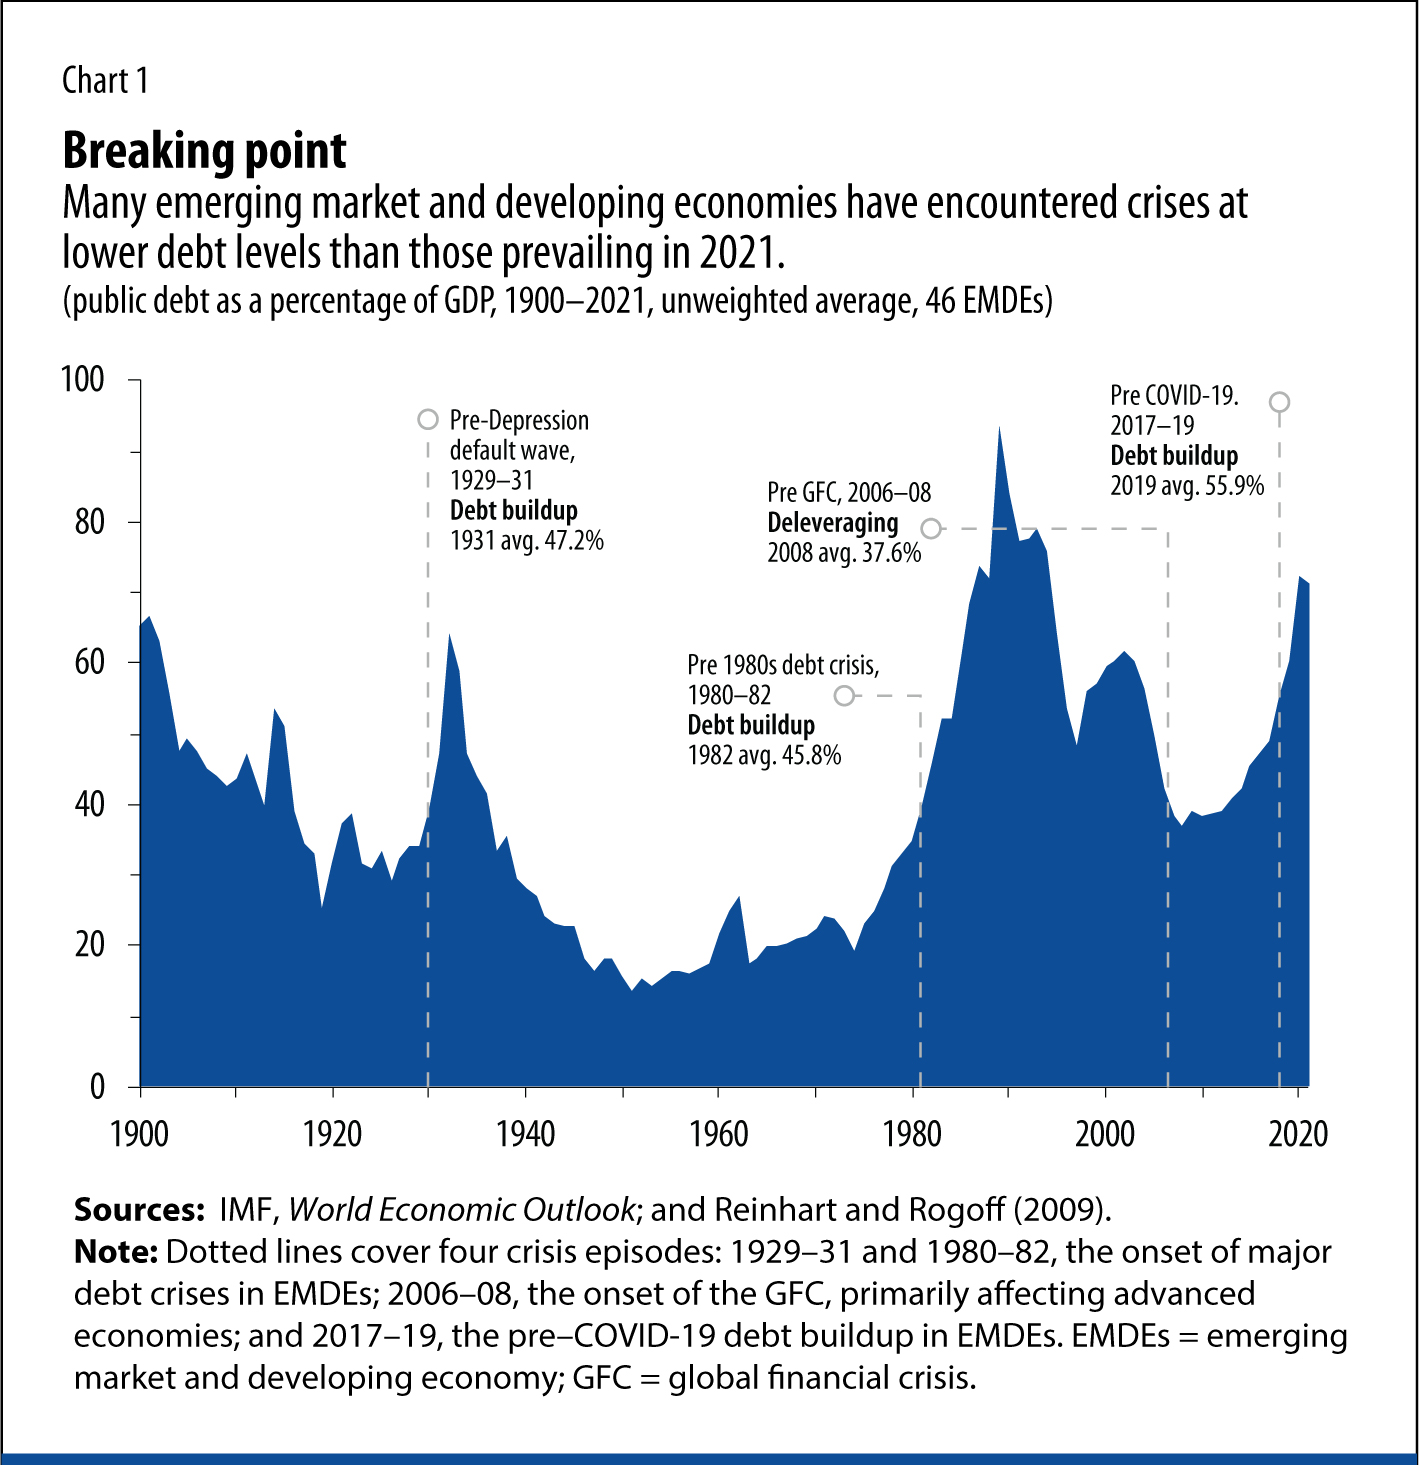 Many emerging market and developing economies have encountered crises at lower debt levels than those prevailing in 2021.